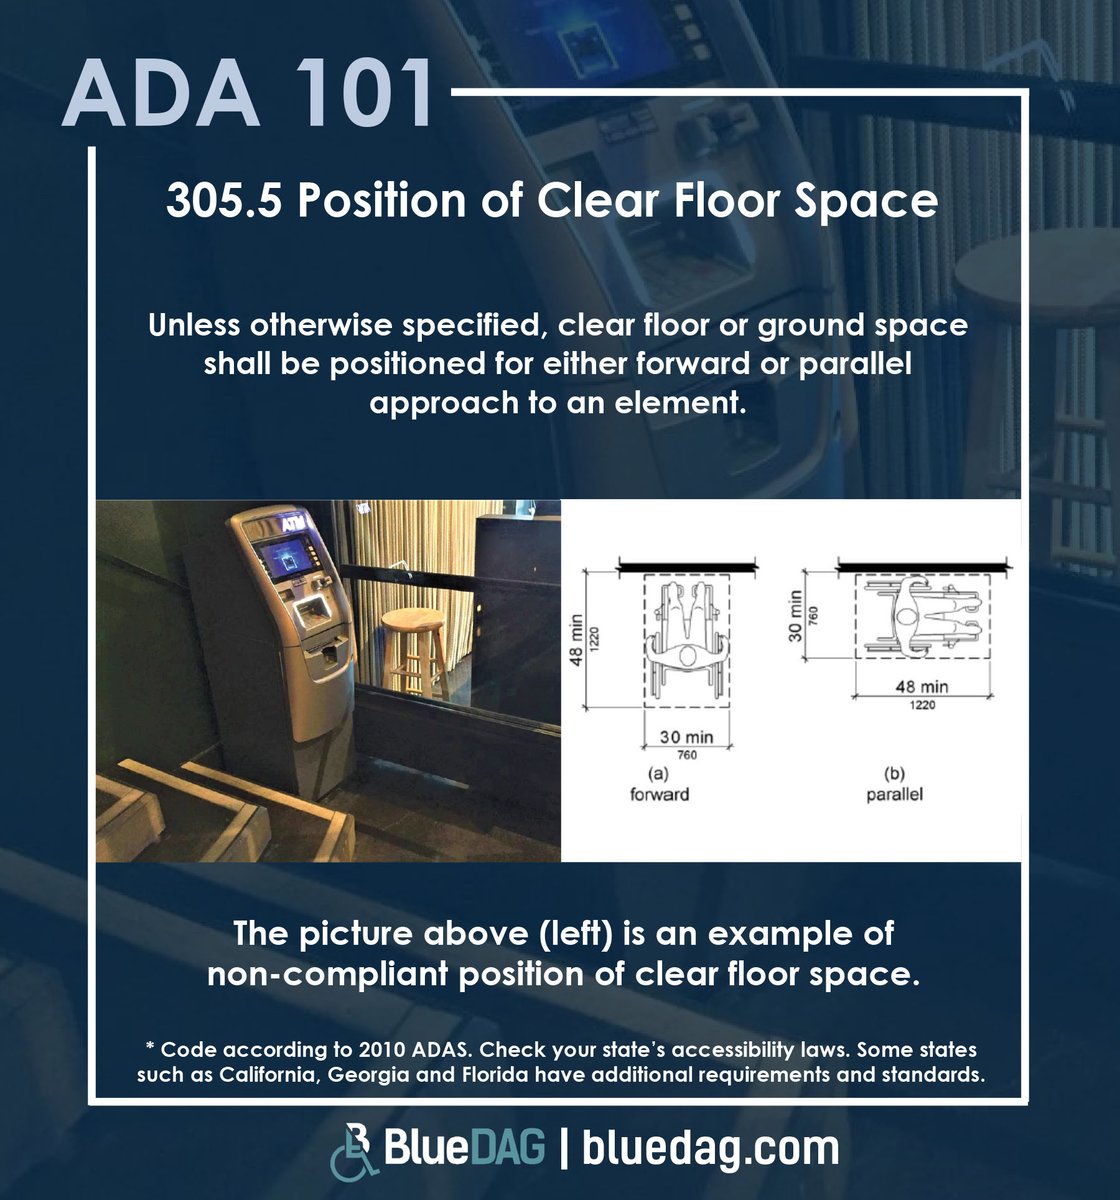 ADA 101 305.5 Position of Clear Floor or Ground Space
#accessibility #ada #americanswithdisabilitiesact #accessibilityforall #abilitynotdisability #adasolutions #adaupgrades